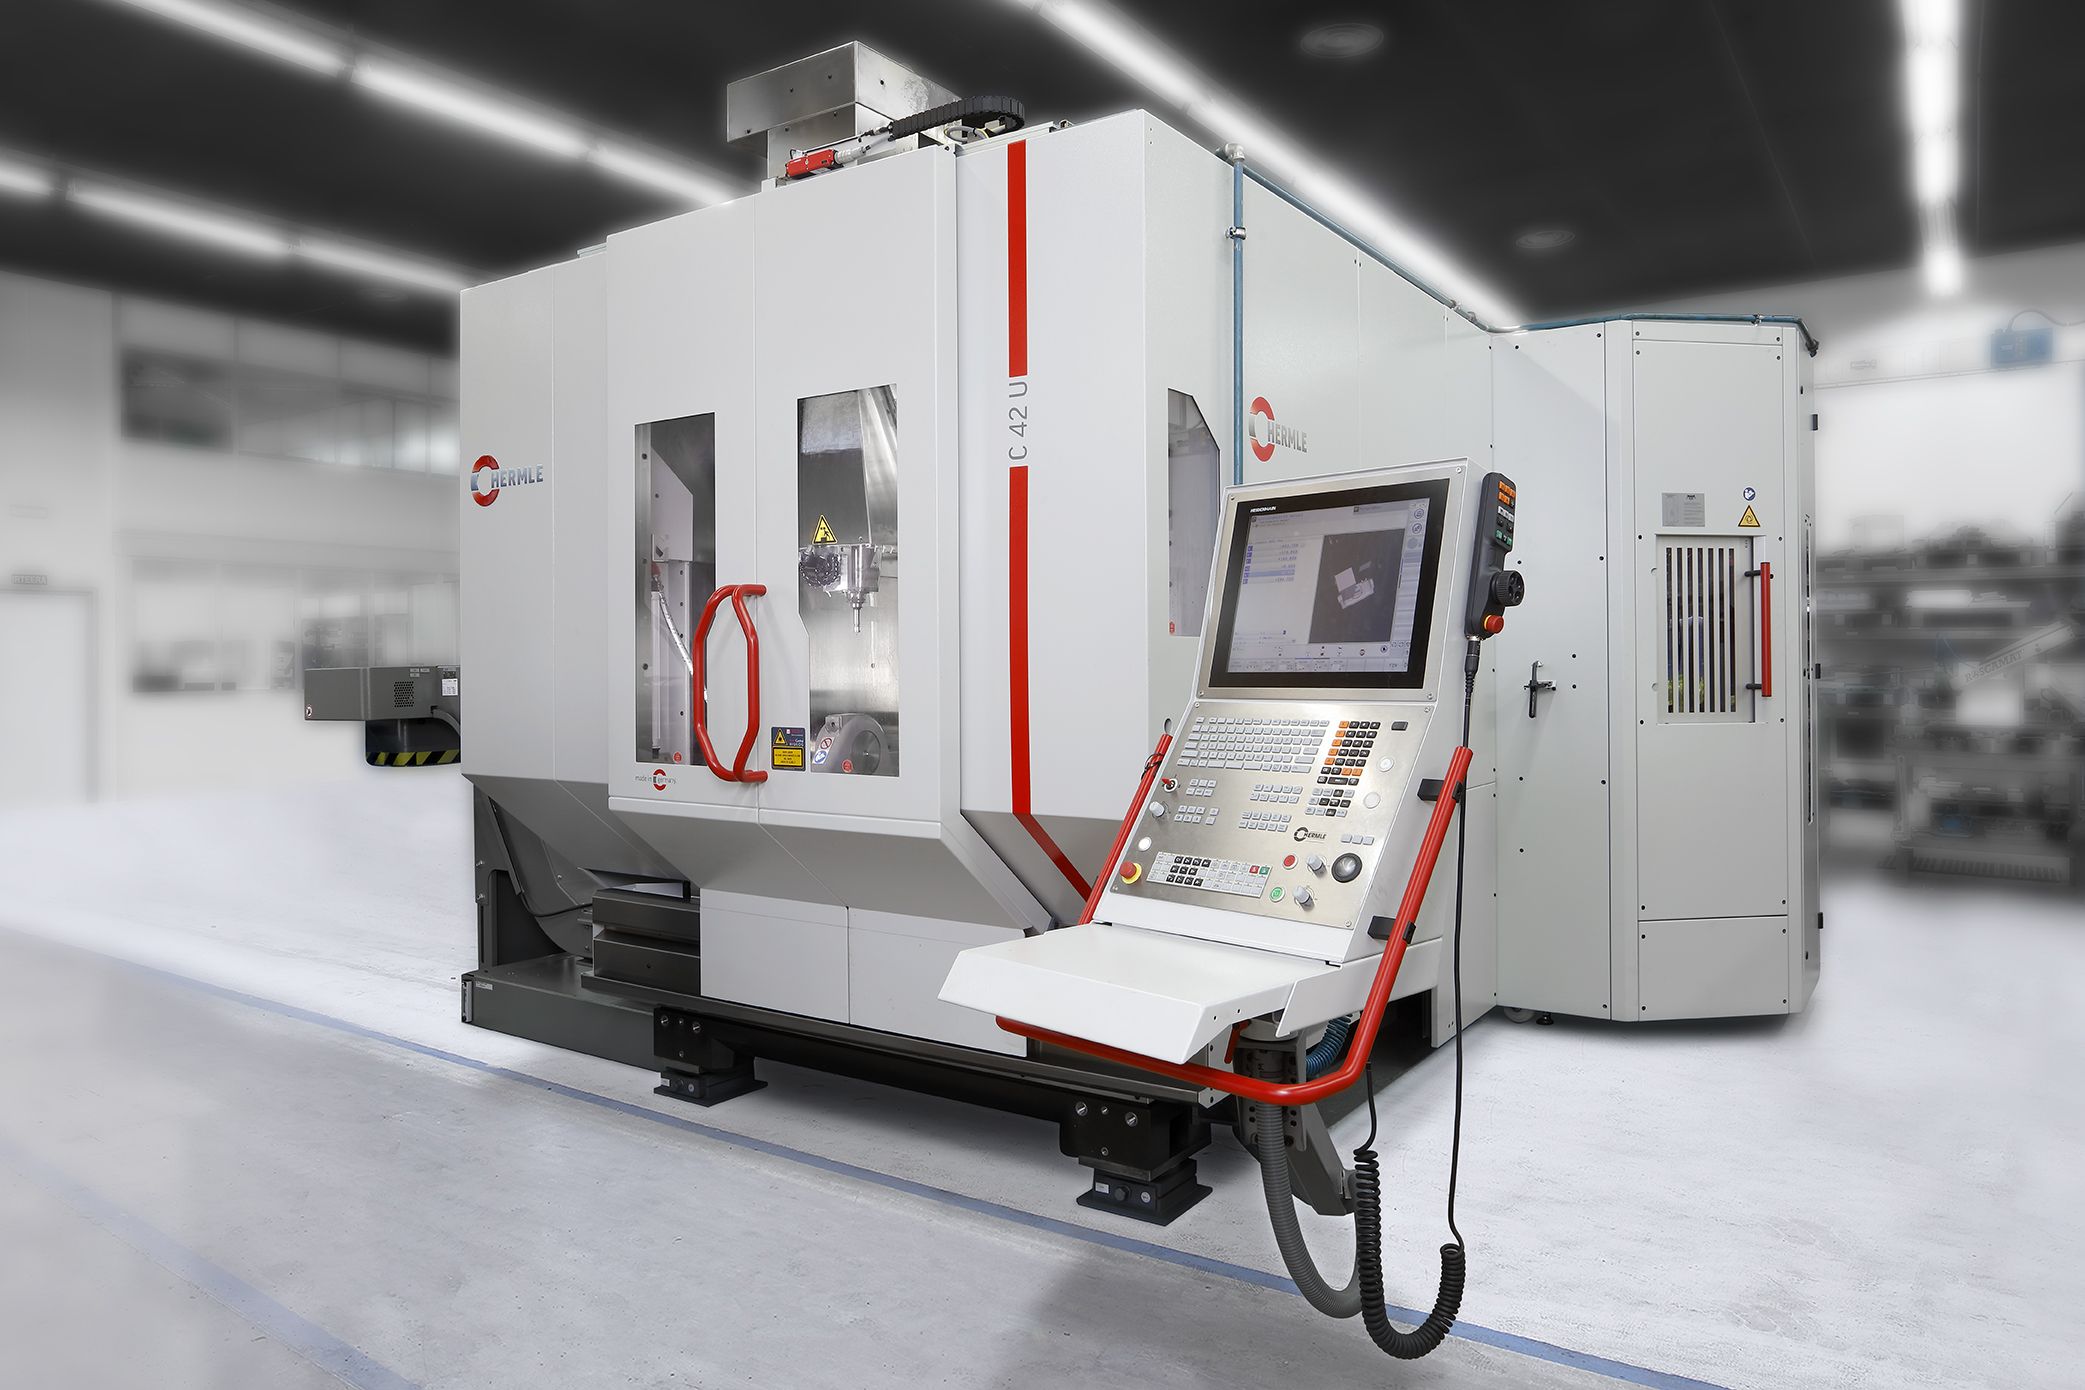 Goimek acquires a new HERMLE C42U for the machining of aeroespace parts